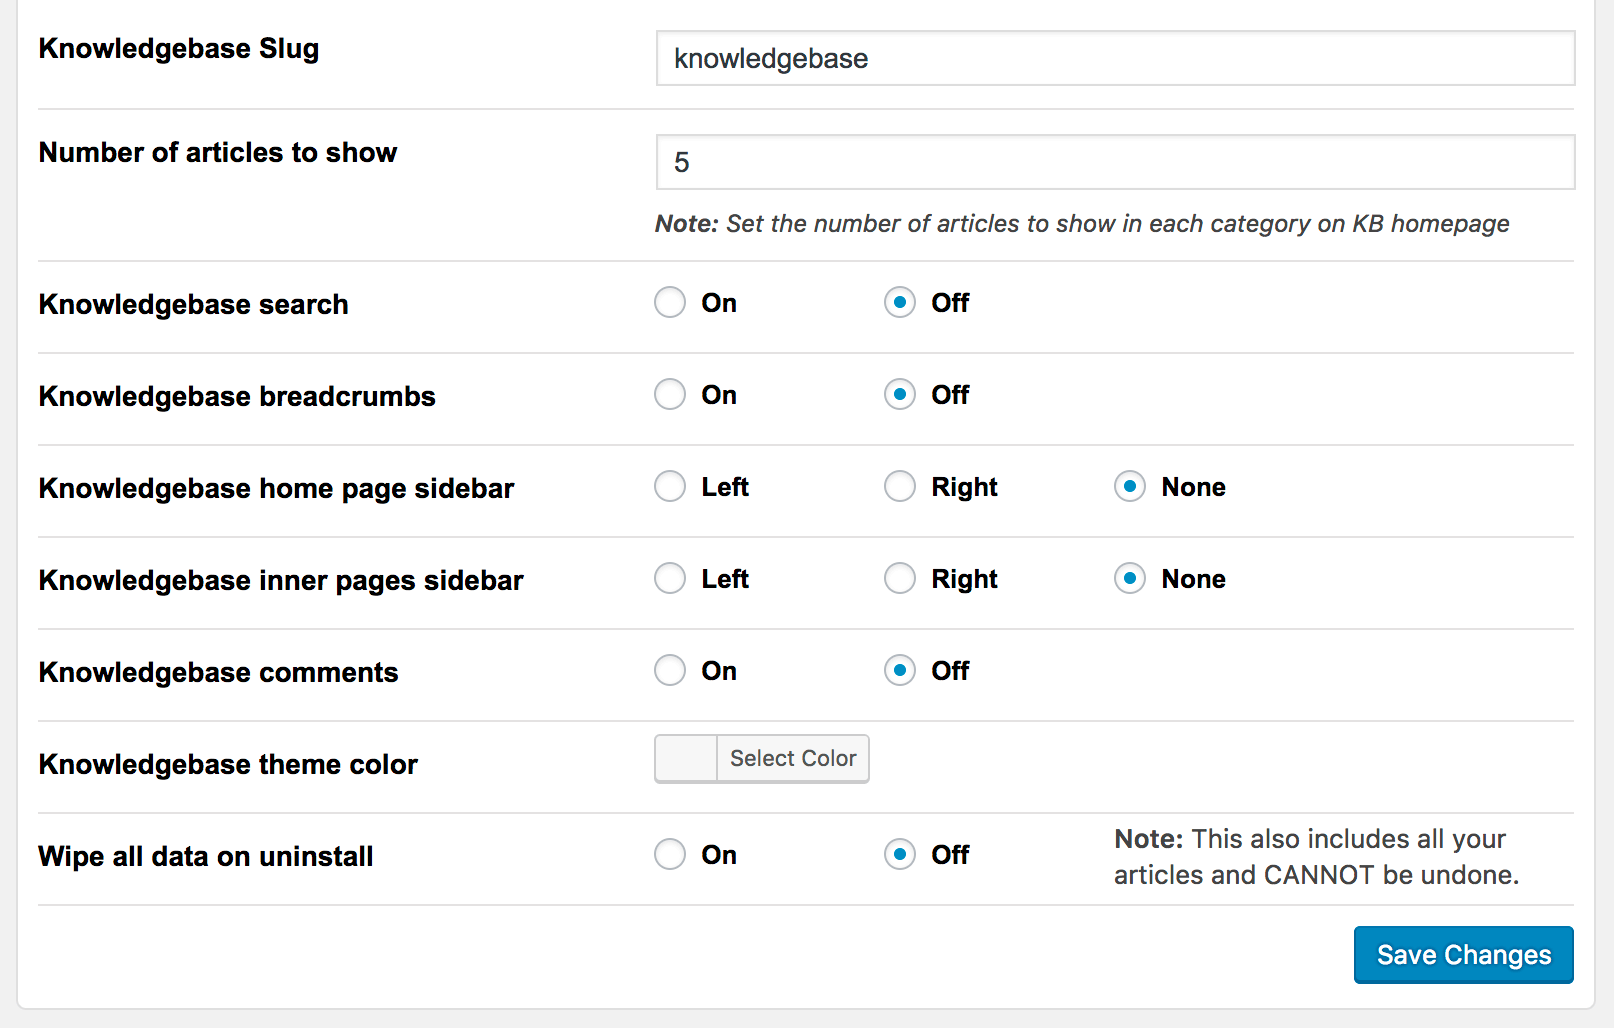 Knowledge base options interface